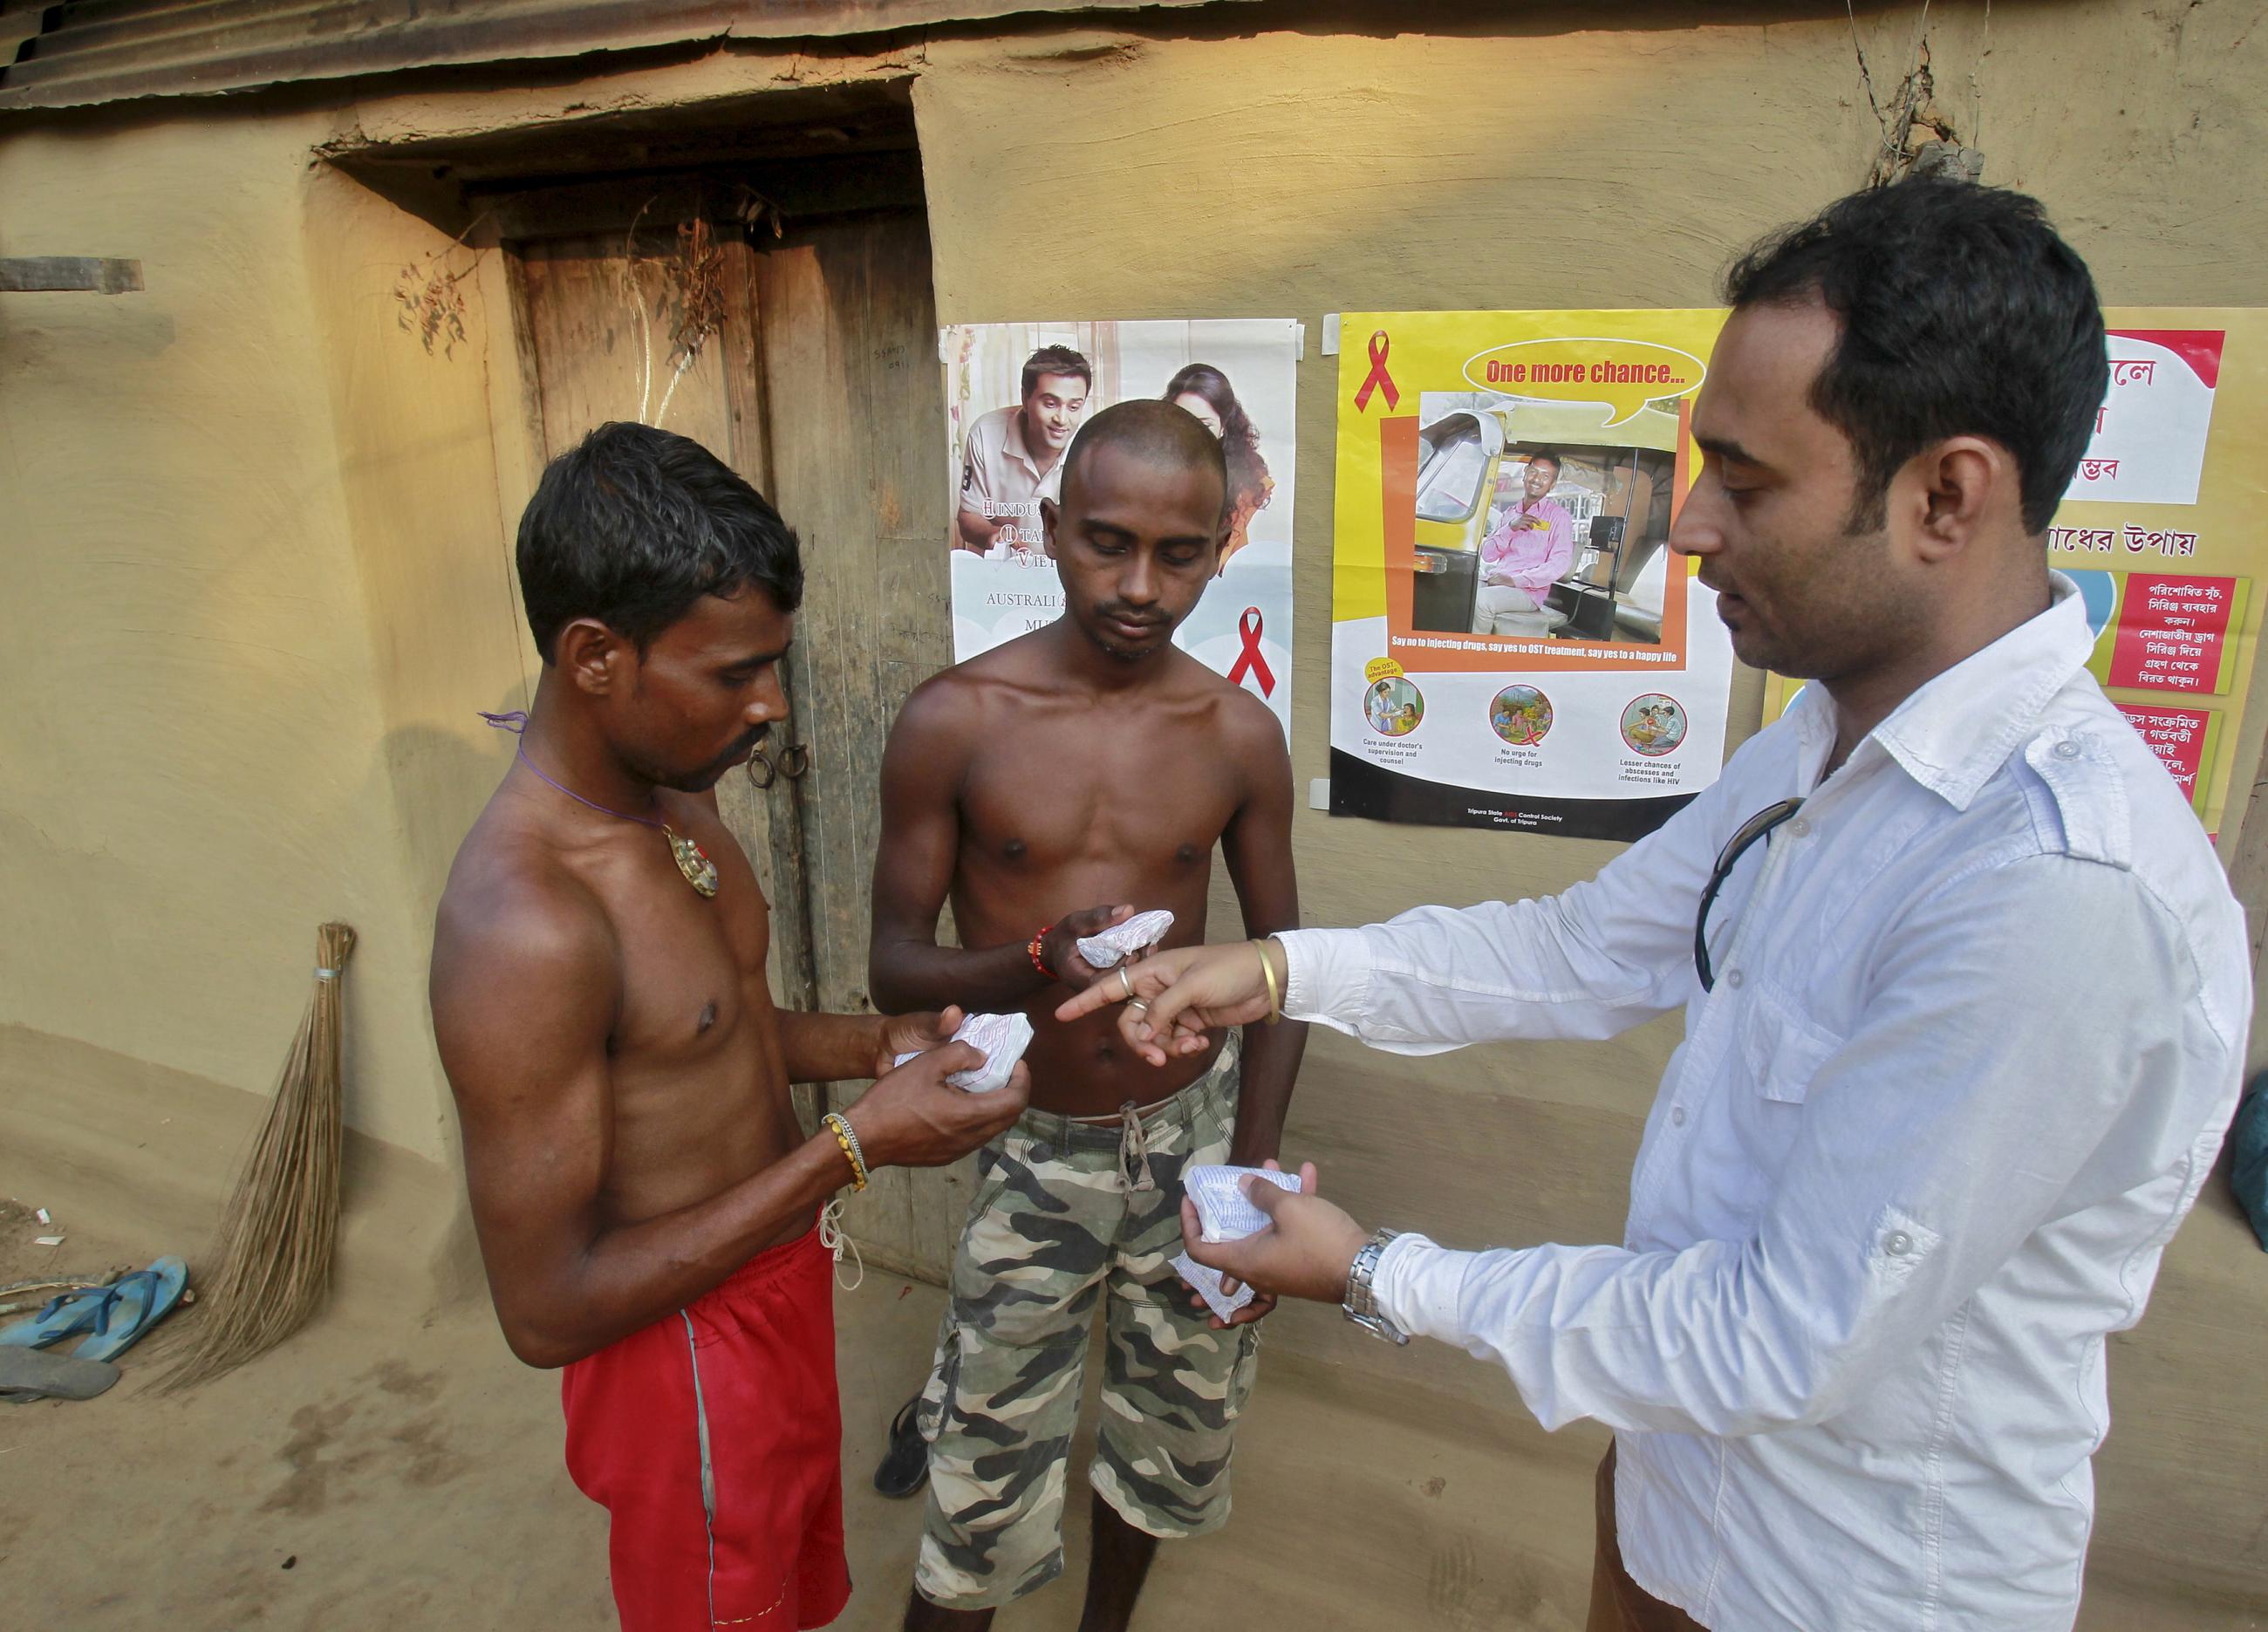 DOCUMENT DATE:  November 06, 2015  A volunteer (right) from a nongovernmental organization distributes free condoms to villagers during an AIDS awareness campaign on the outskirts of Agartala, India, on November 6, 2015. 